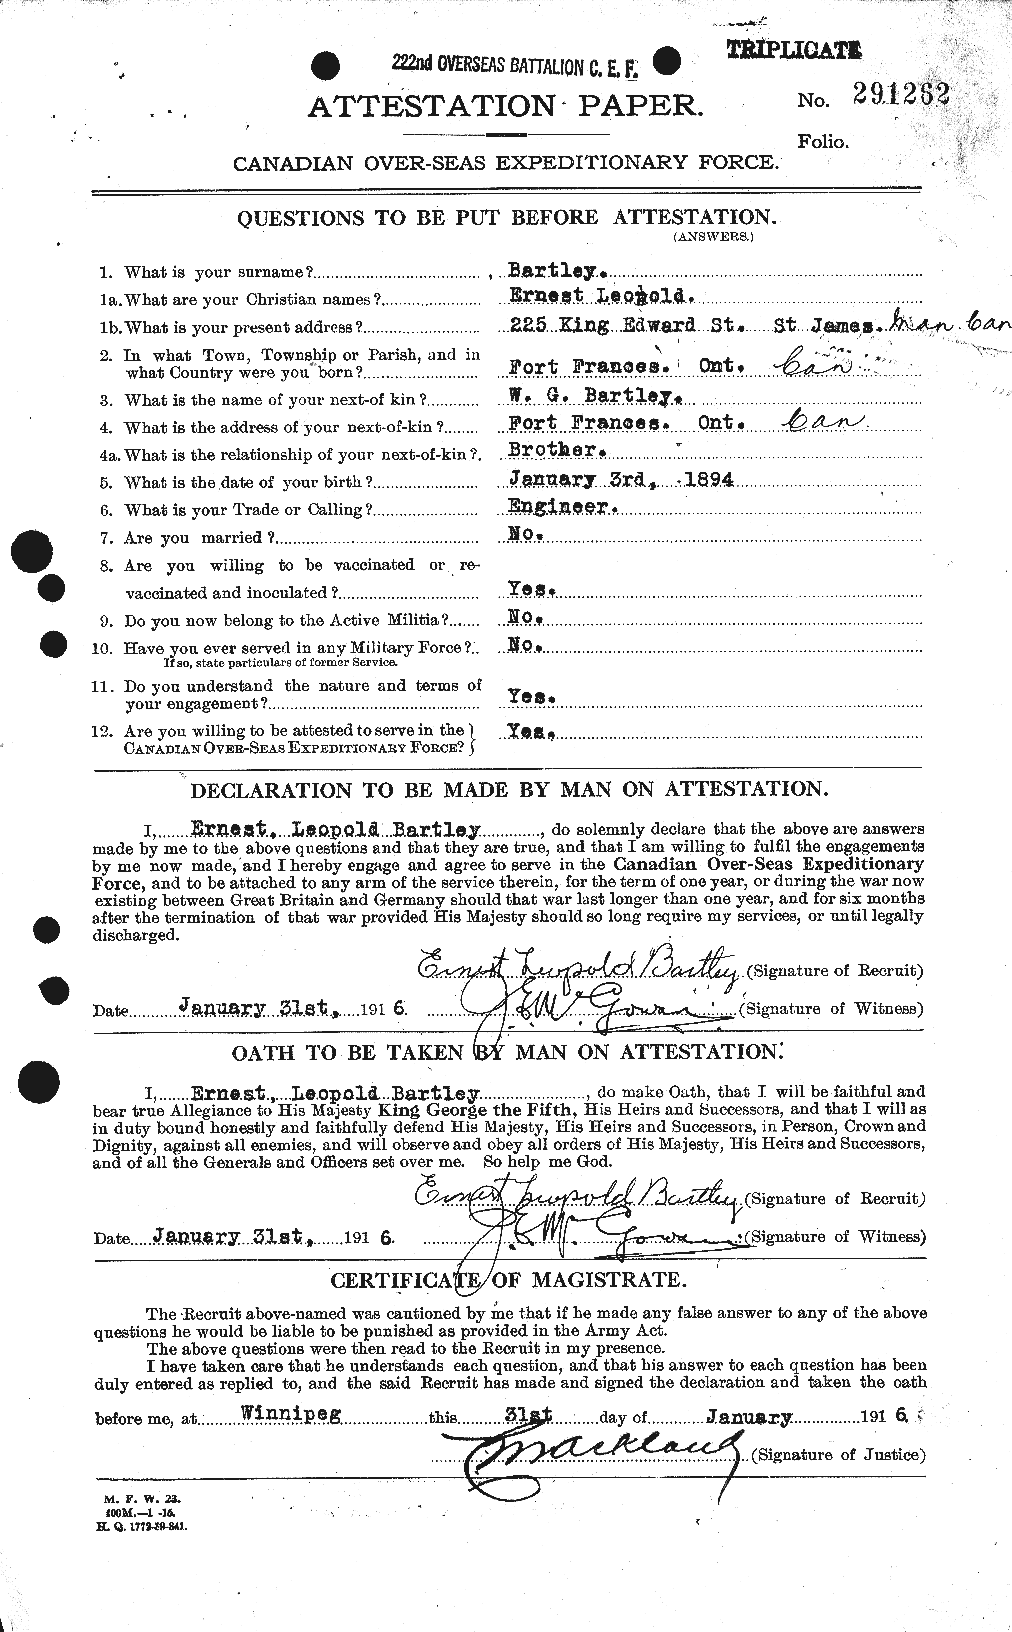 Personnel Records of the First World War - CEF 229382a